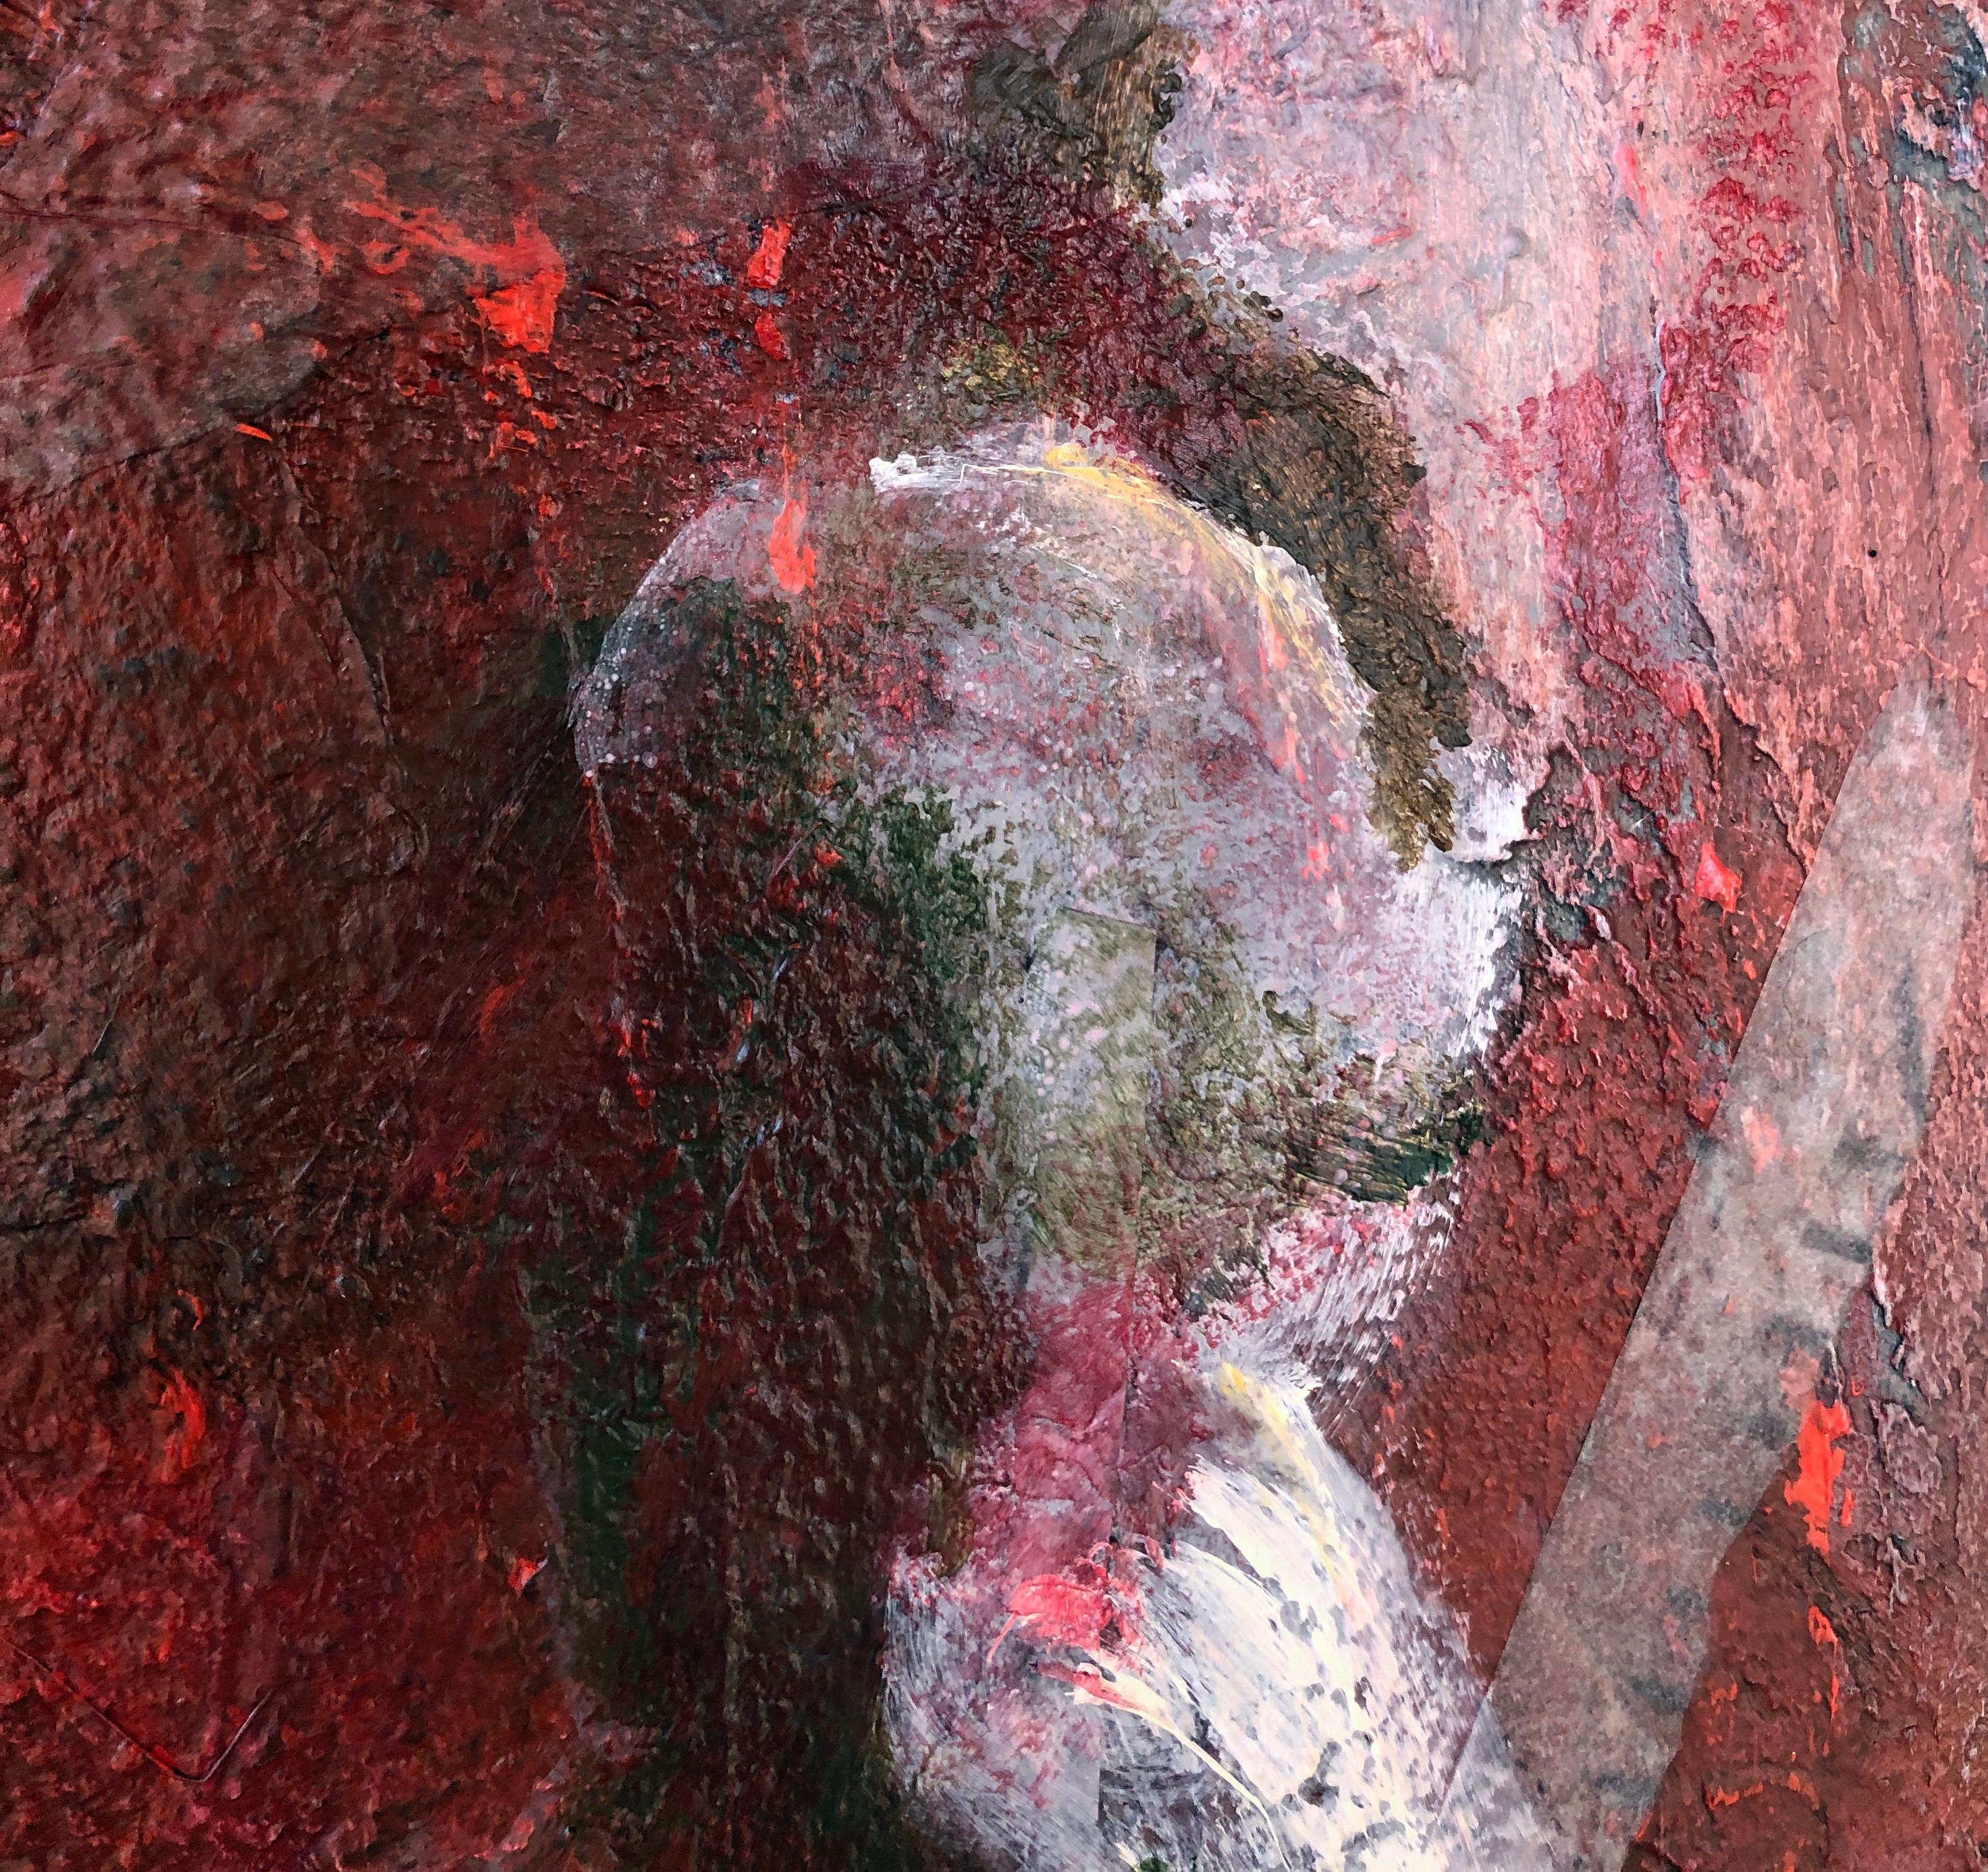 <p>Artist Comments<br />Two figures pose in a crimson space. There is an underlying tension in this expressionist portrait, and artist Sharon Sieben says 